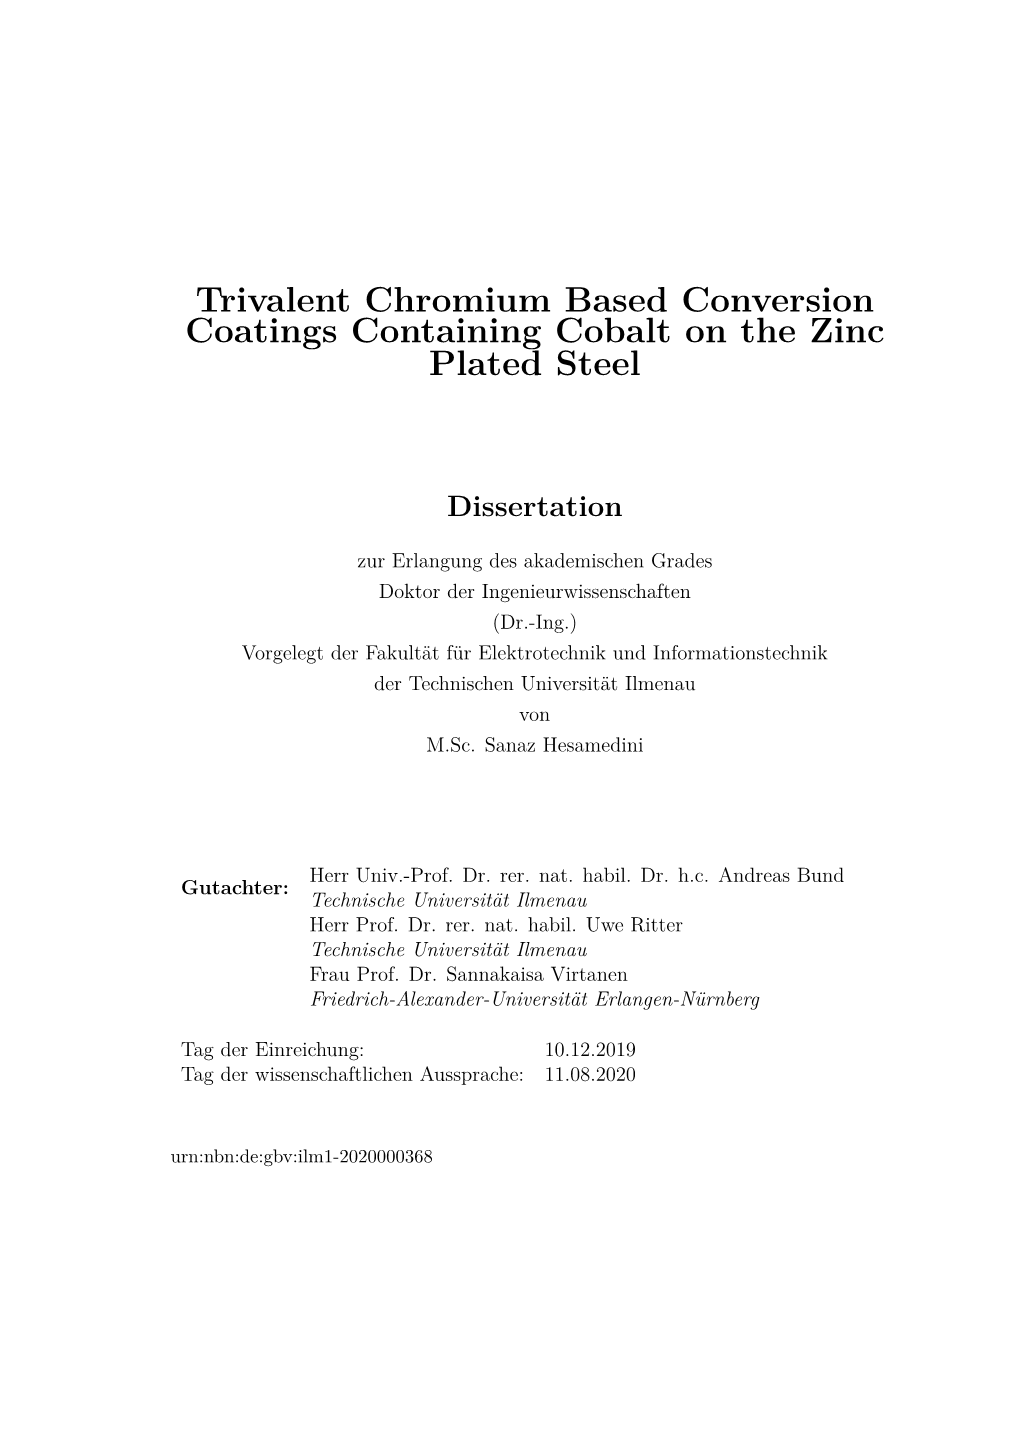 Trivalent Chromium Based Conversion Coatings Containing Cobalt on the Zinc Plated Steel